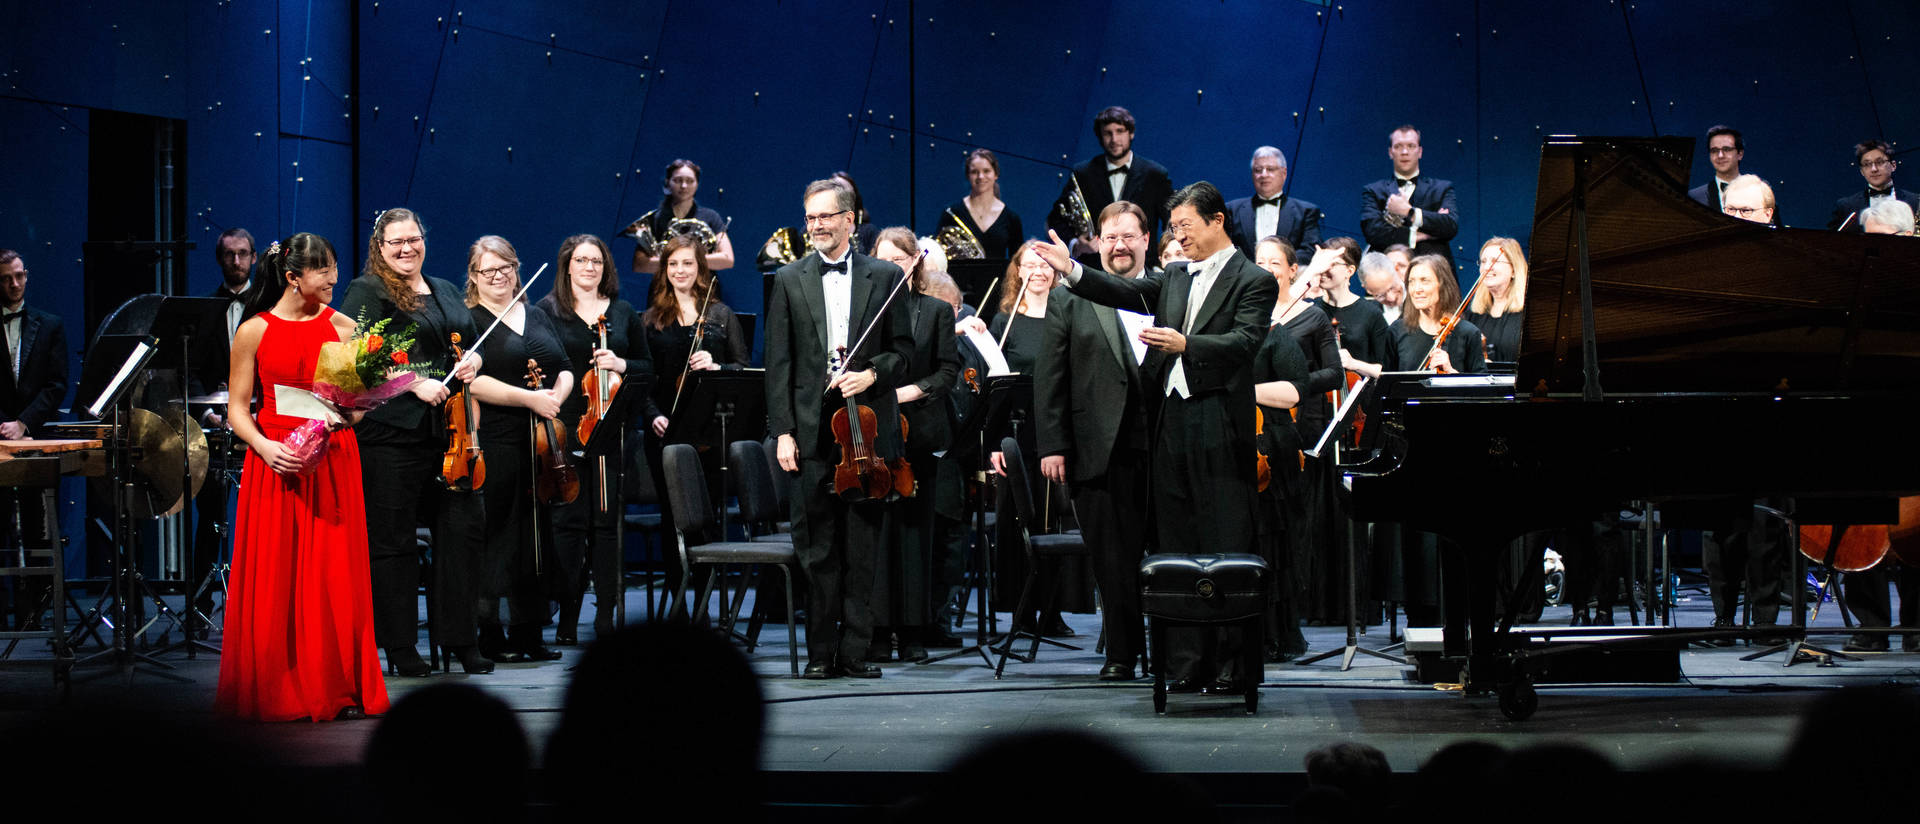 Nobuyoshi Yasuda, pictured with the Chippewa Valley Symphony and soloist Jessica Jiang earlier this month, has been selected to lead the 2020 All-National Symphony Orchestra next November in Orlando, Florida. (Photo credit: Mark Oliver)